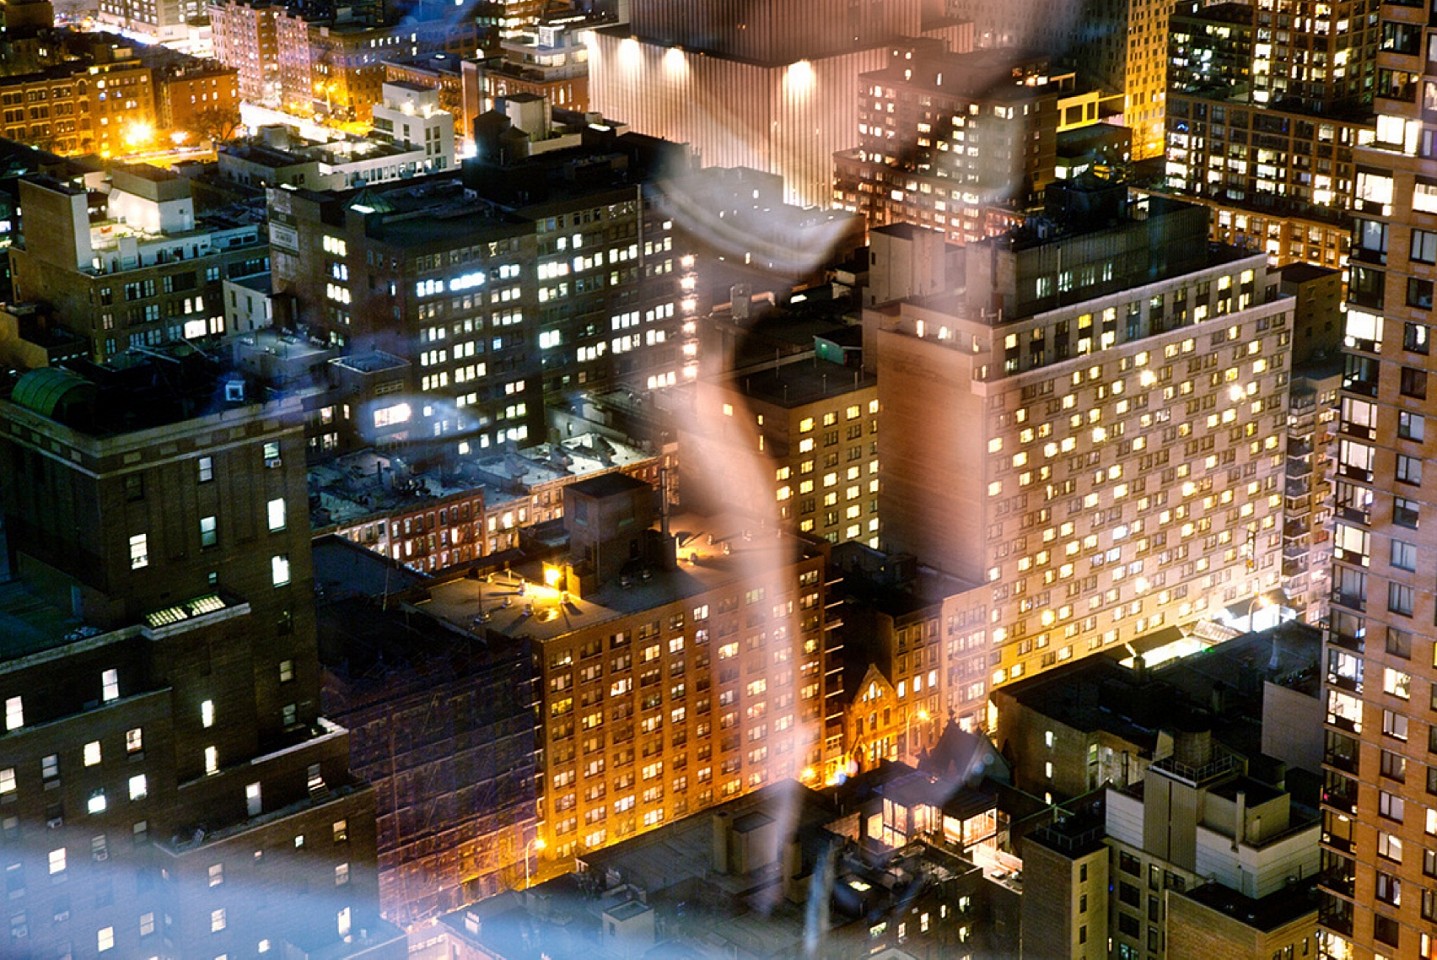 David Drebin, Flashing the City, 2012
48 x 72 and 30 x 45 and 20 x 30 inches